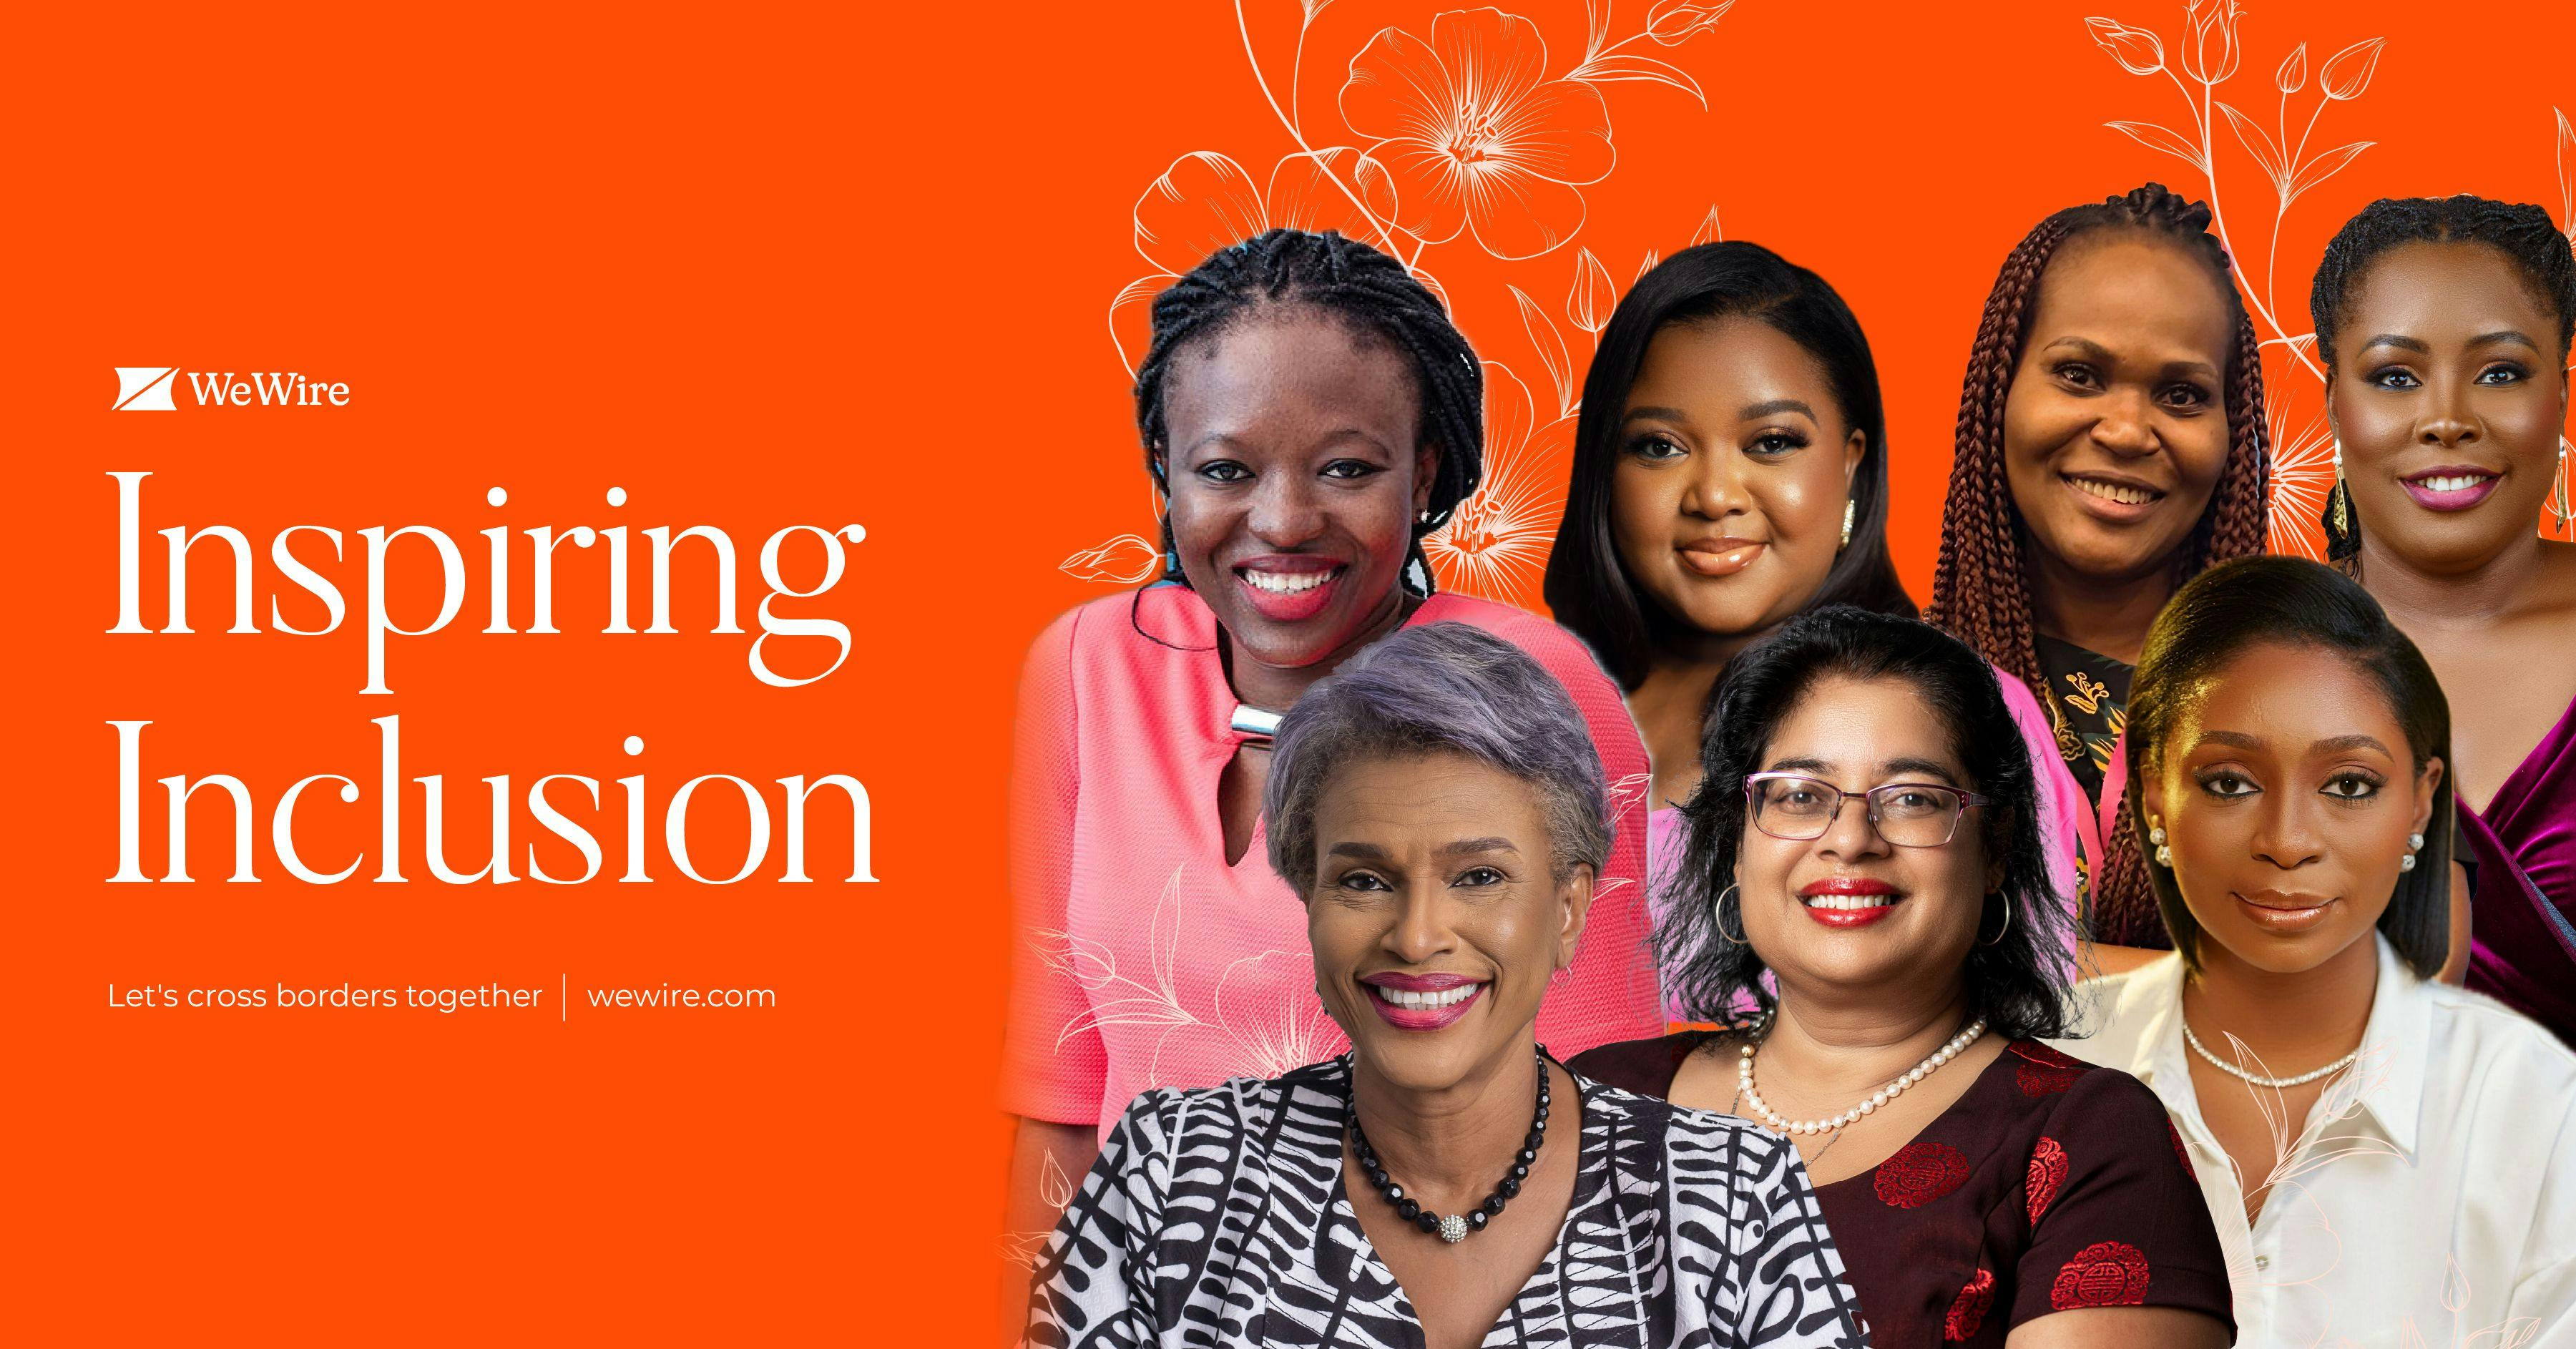 Cover Image for Inspiring Inclusion through WeWire’s You Inspire Women’s List